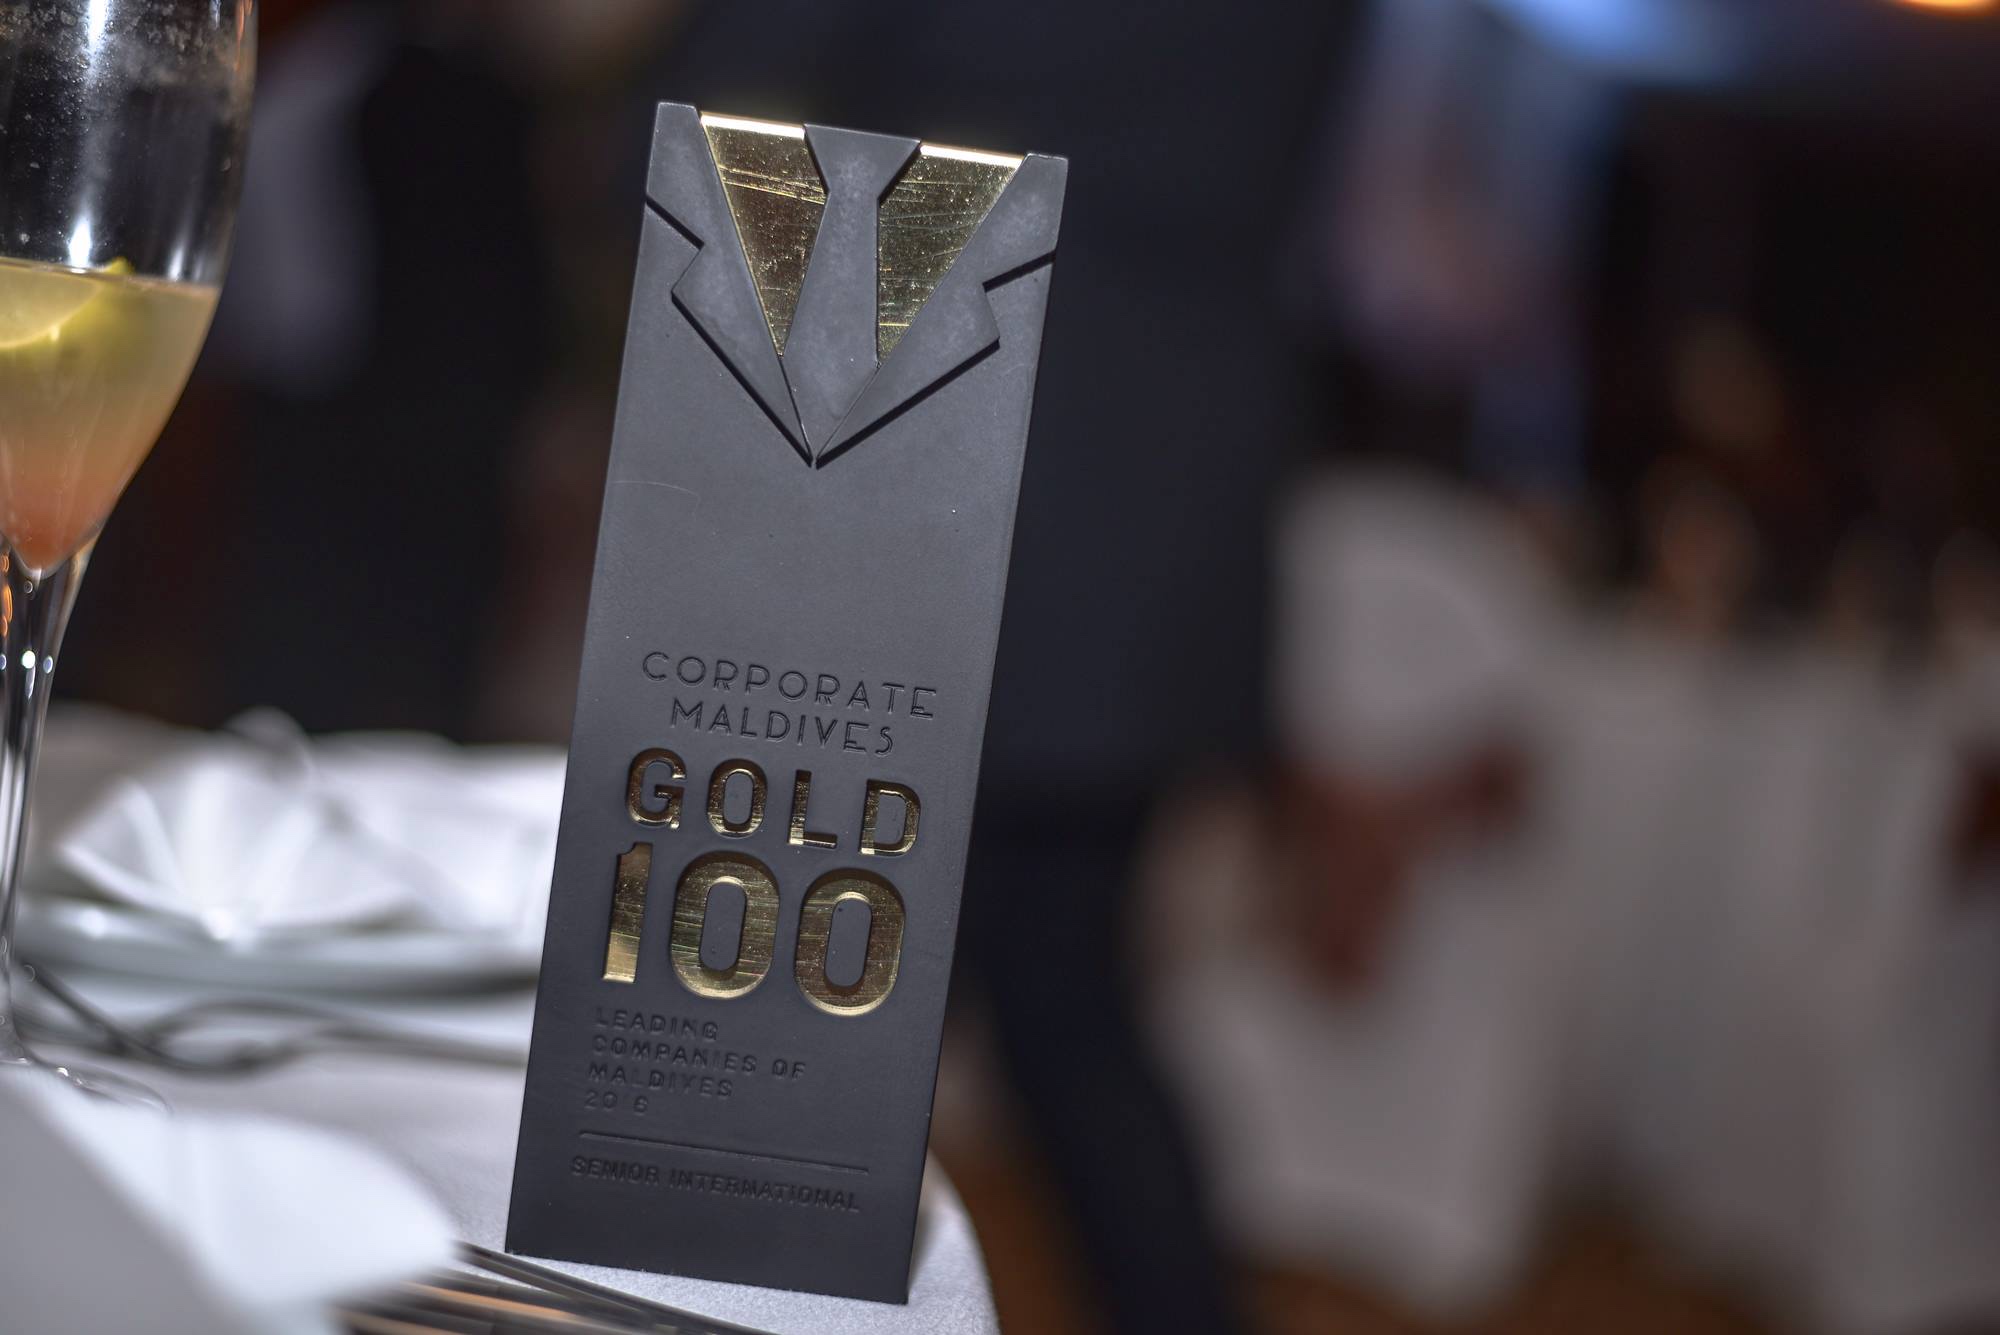 Fedo Received the Gold 100 in the Second Consecutive Year